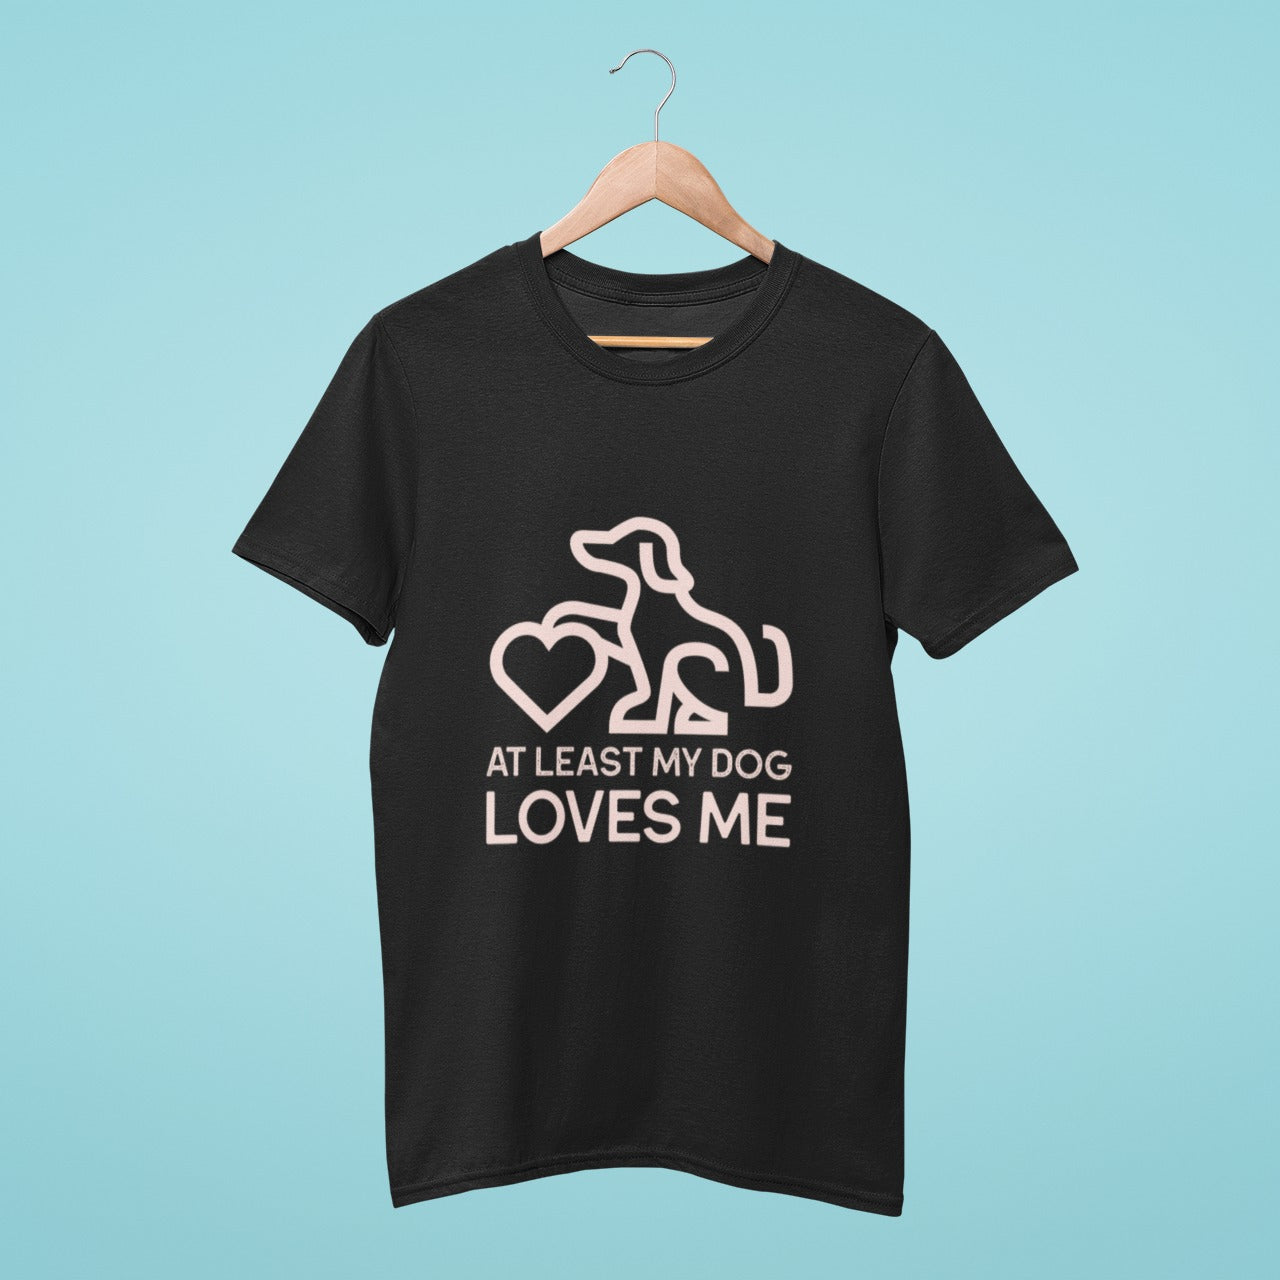 Show your love for your furry friend with our 'At Least My Dog Loves Me' t-shirt. Featuring a simple yet heartwarming line drawing of a dog sitting on a heart, this black tee is perfect for any dog lover who knows that their pup's love is unconditional.